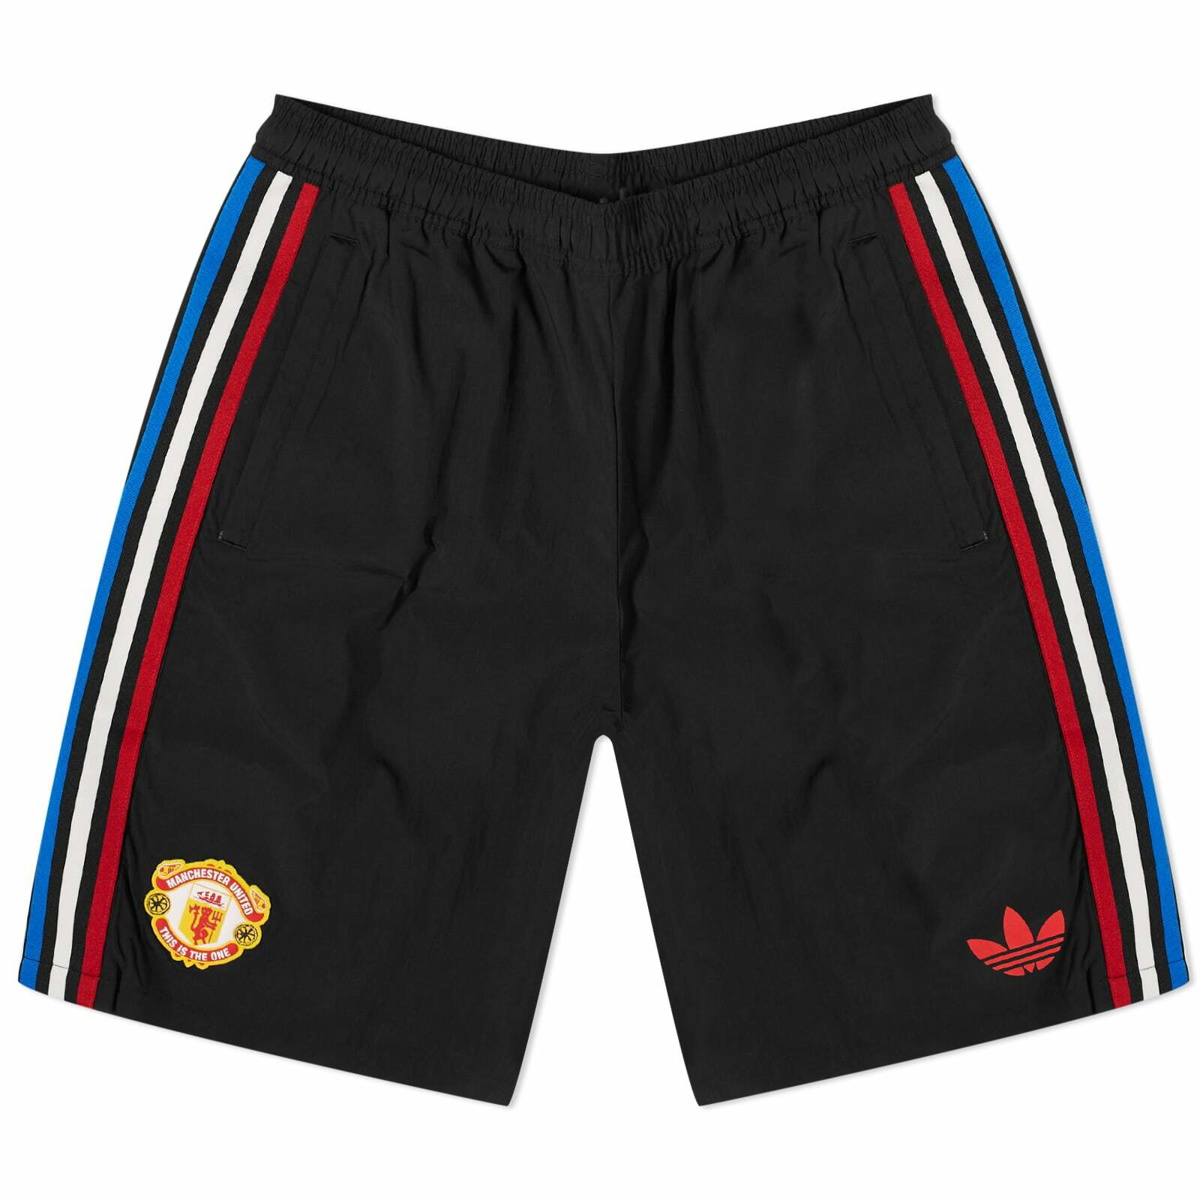 Photo: Adidas Men's x MUFC x The Stone Roses Shorts in Black